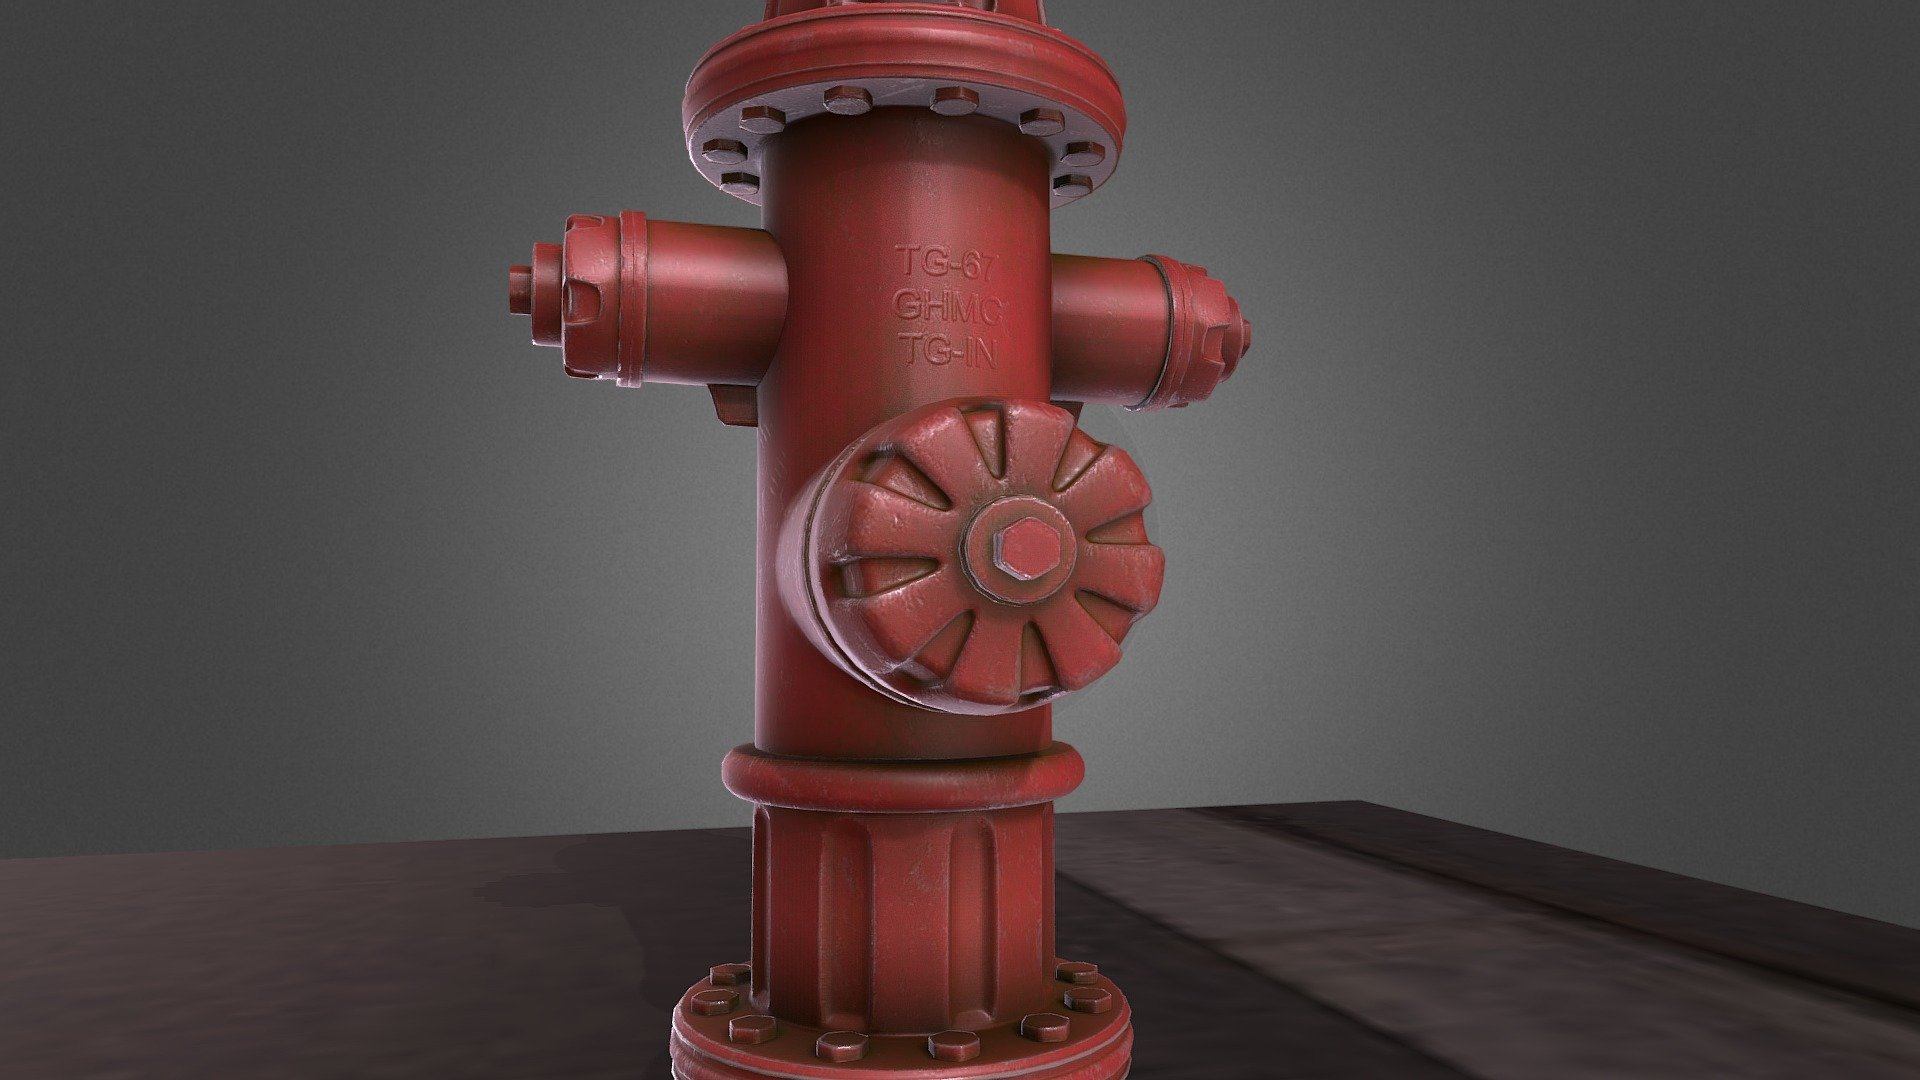 Modelled and unwrapped this Fire hydrant in Maya,Textures in Substance painter and Substance designer.Still learning to improve .Took 5 hours to complete,
Hope you'll like it.Thanks for Visting here :D - Fire Hydrant 3D - 3D model by akhilbeeram 3d model